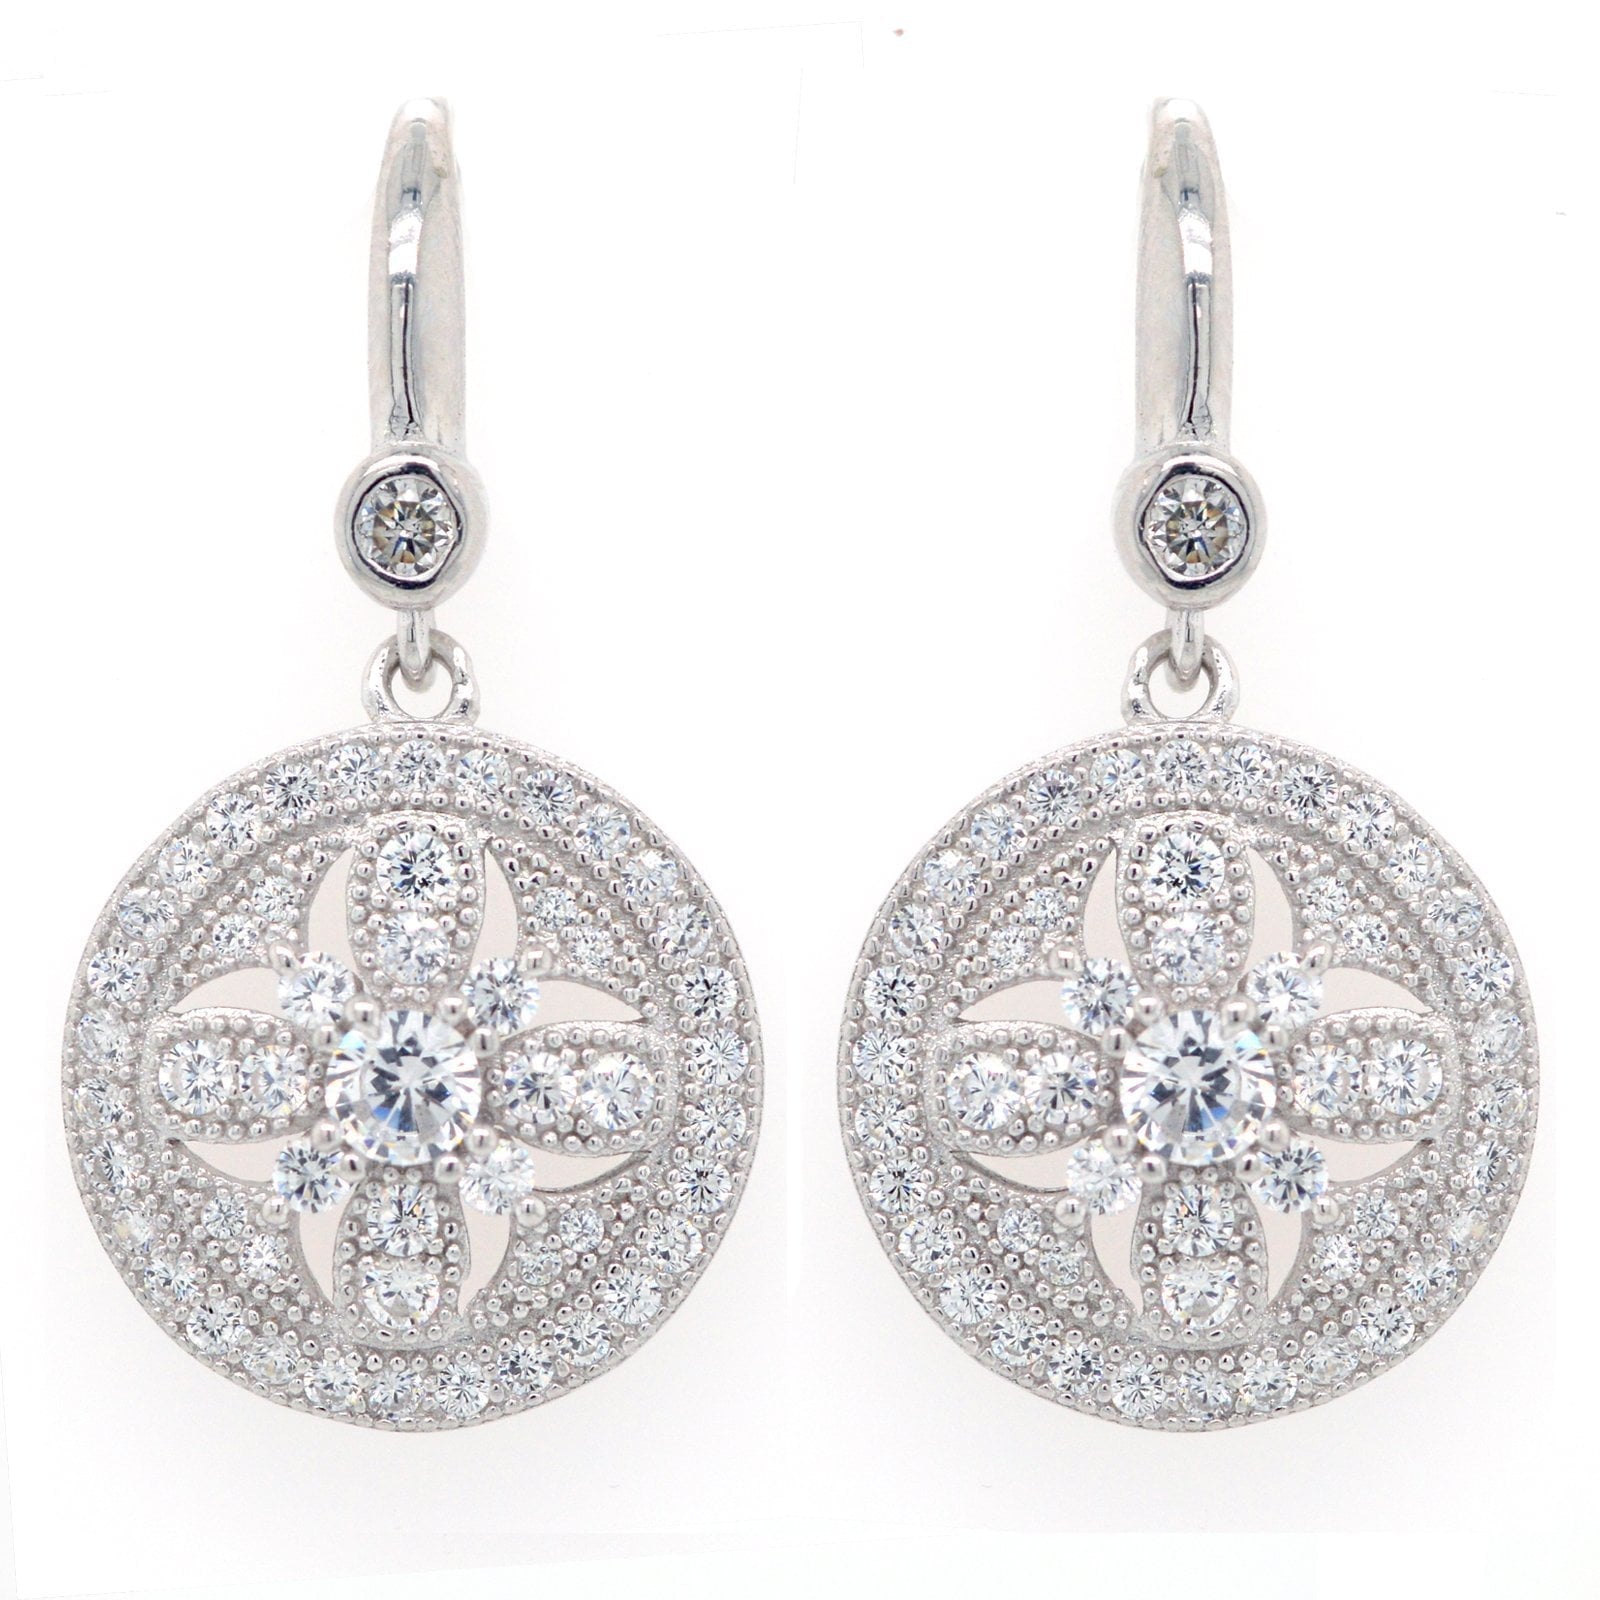 Sybella Earrings Sybella round antique earrings